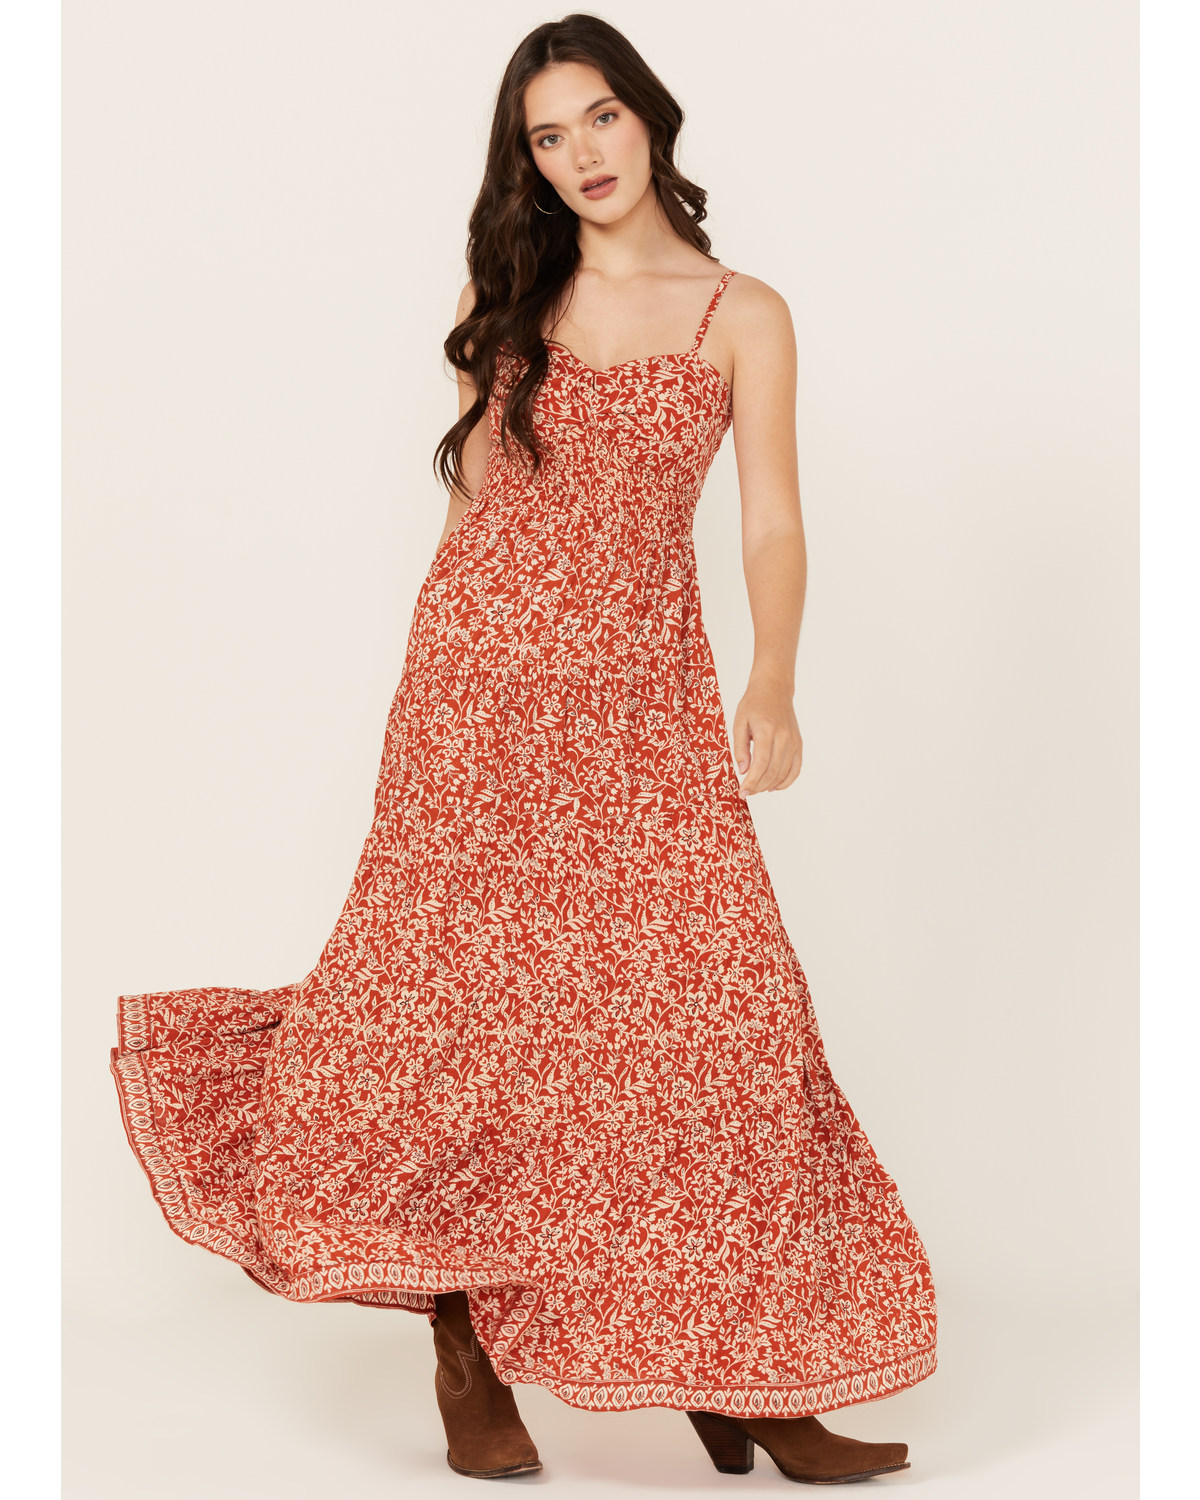 Angie Women's Floral Maxi Dress